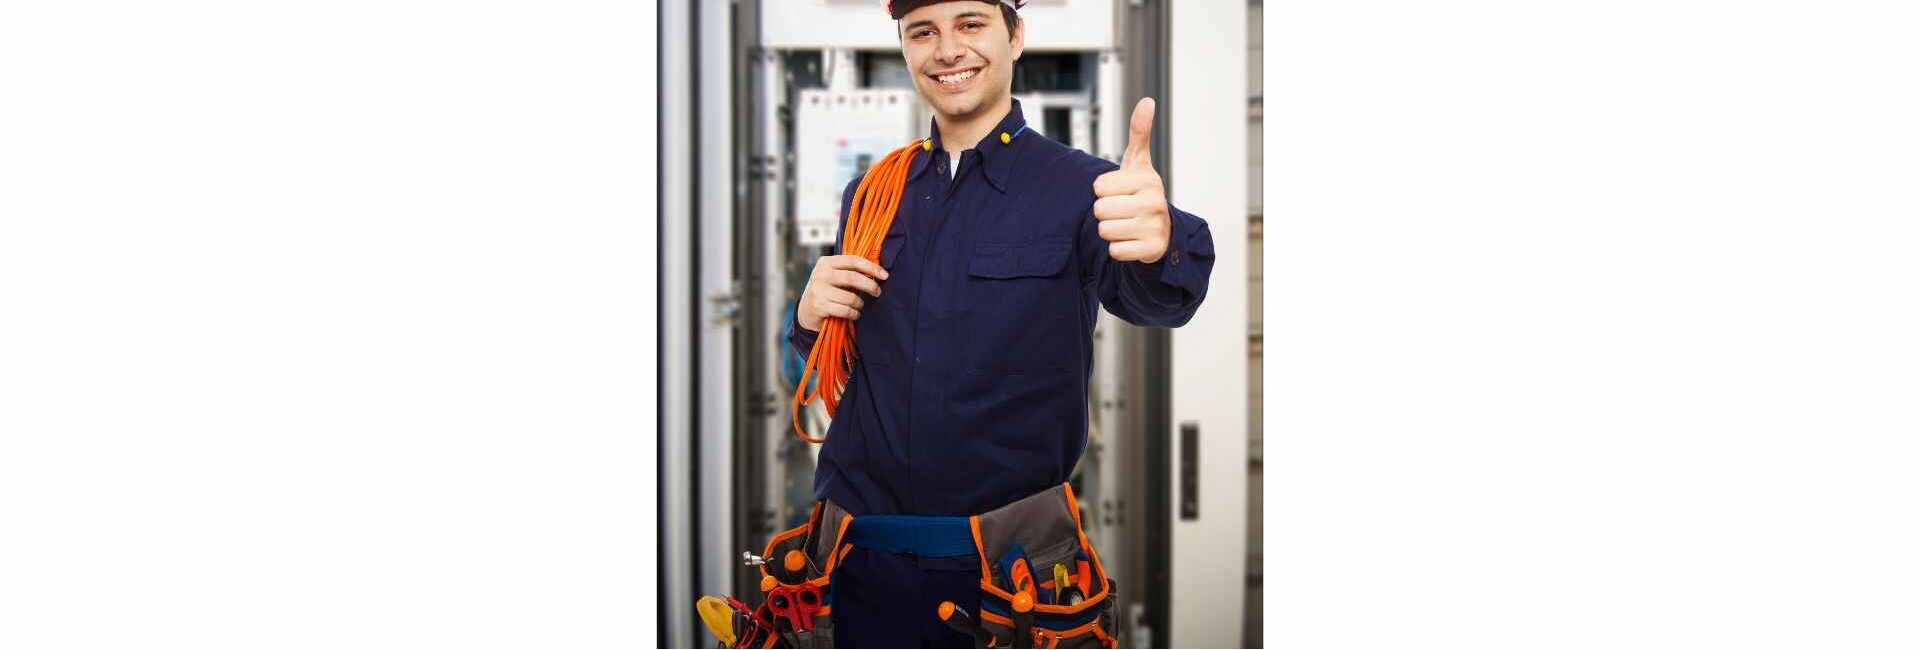 Noida Electricians- electrical safety inspections in Noida